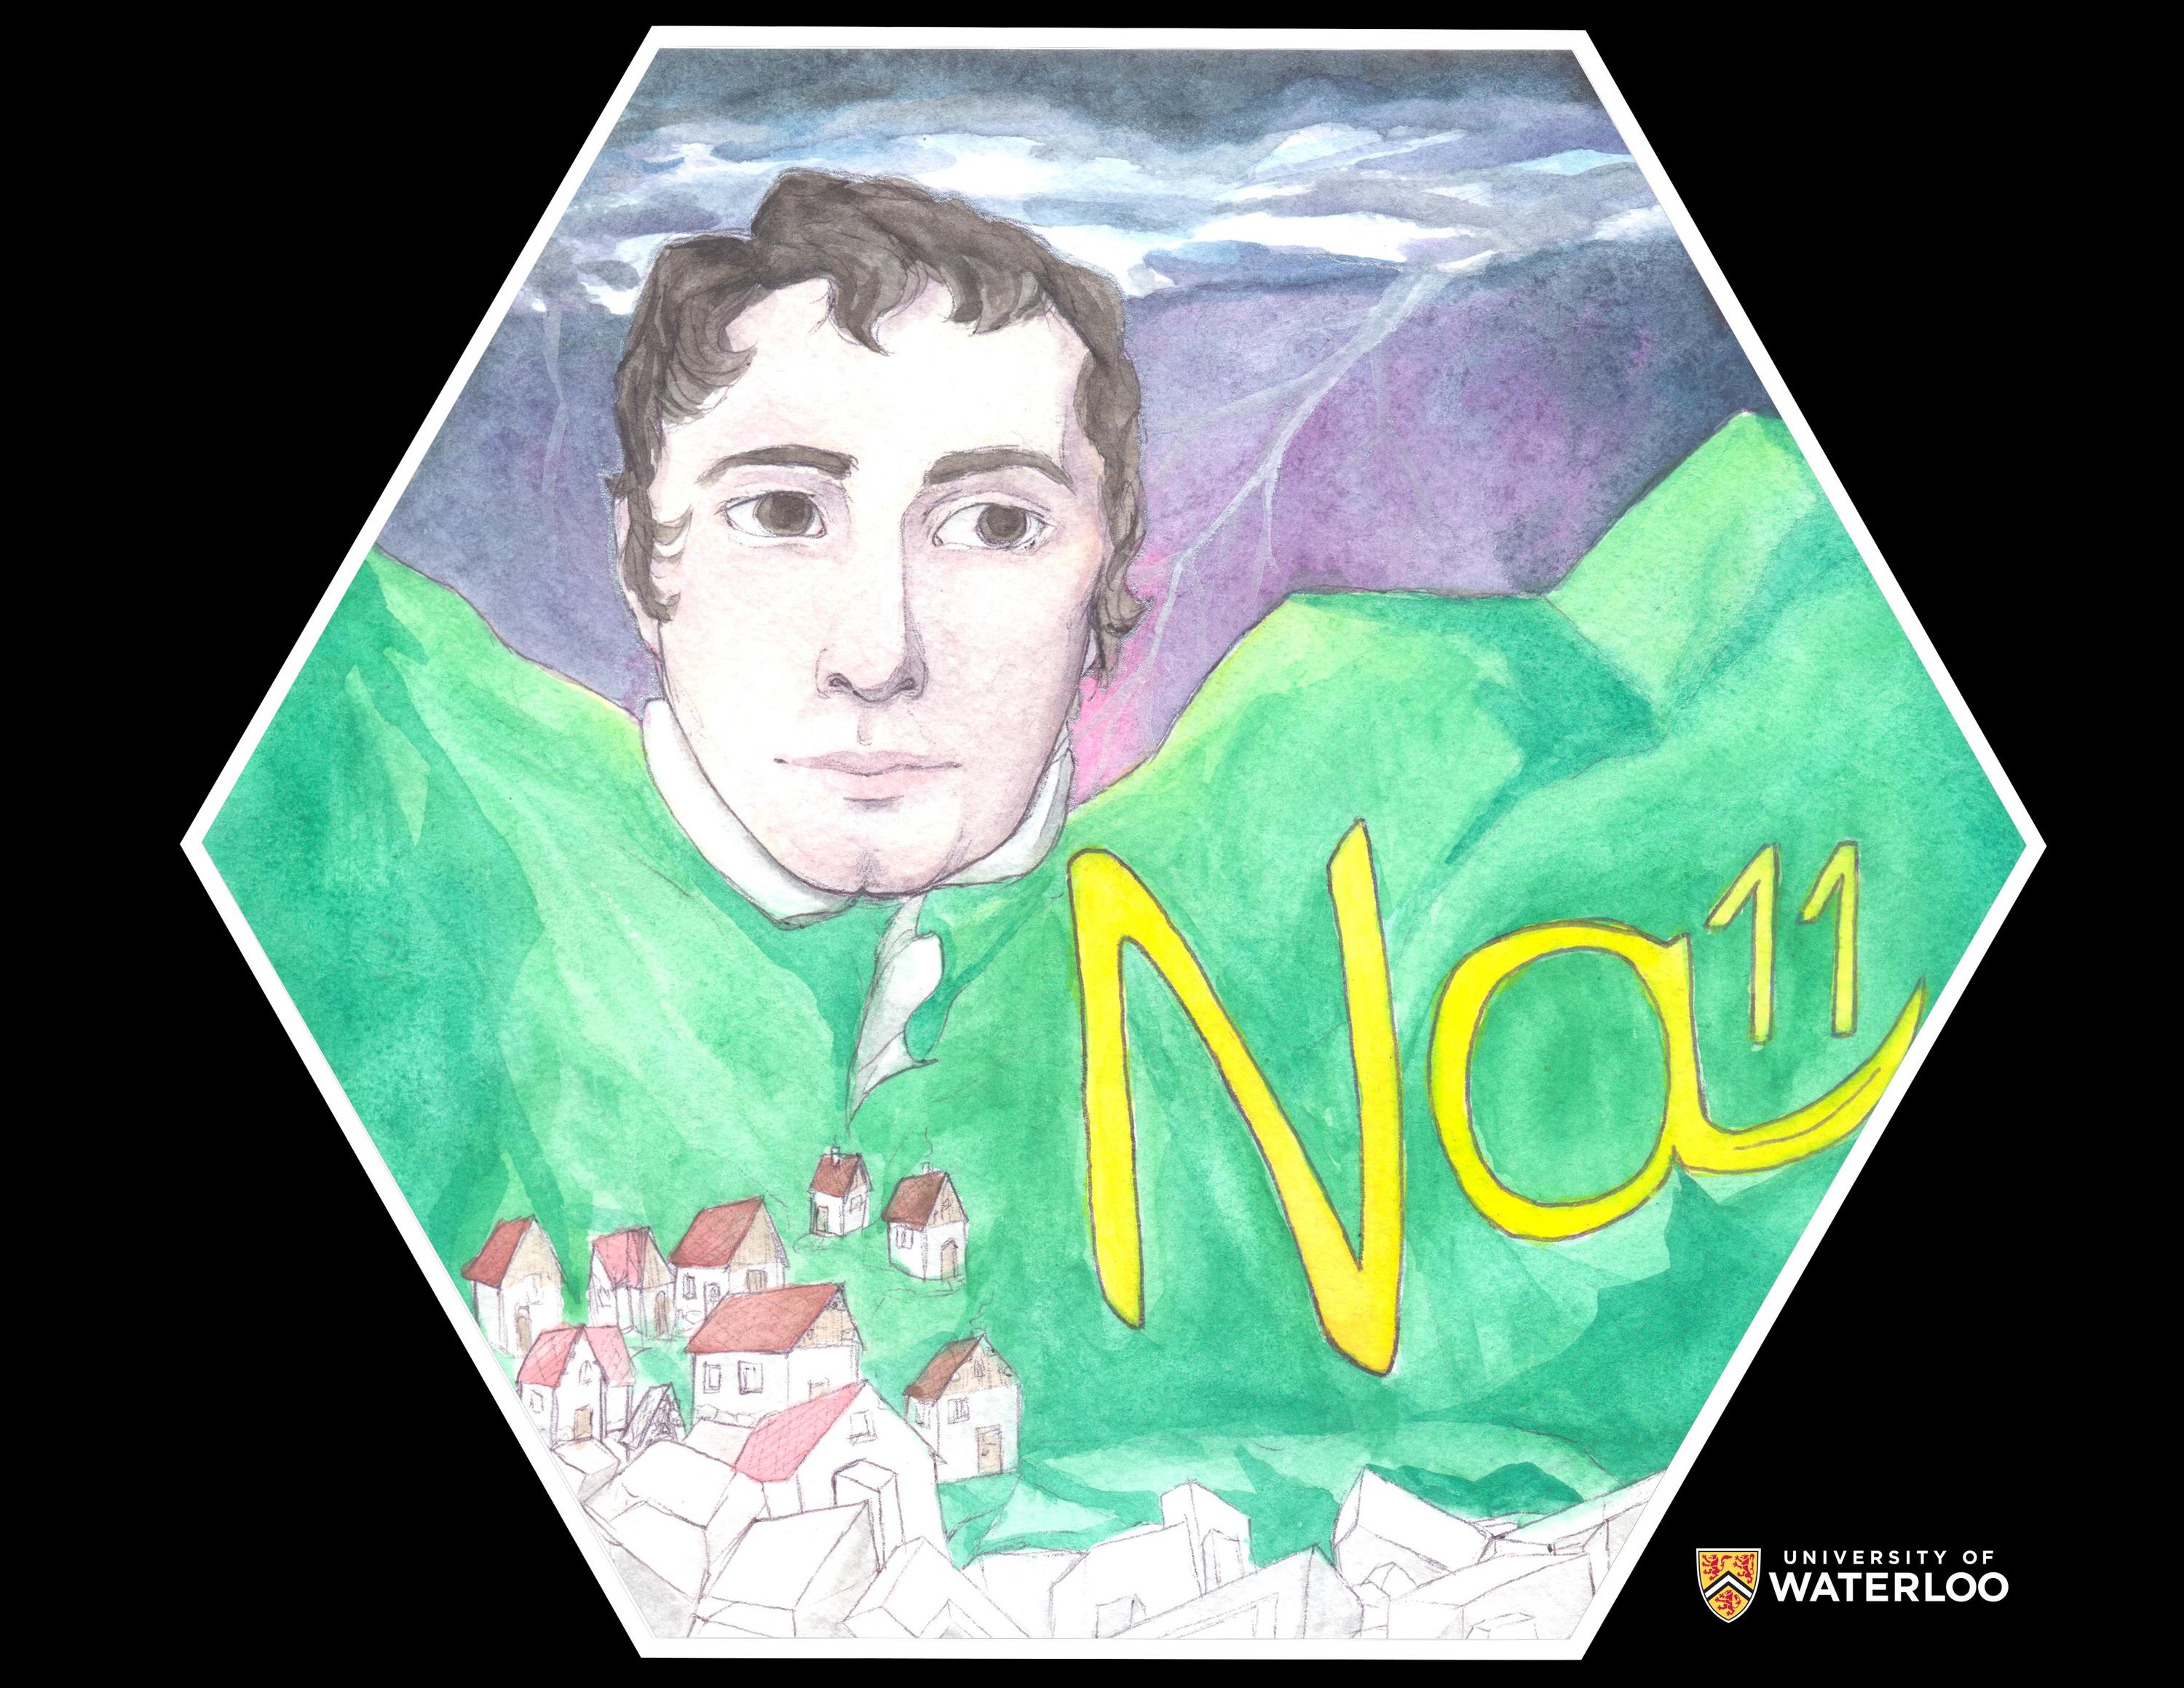 Pen and watercolor on paper. Sir Humphrey Davy’s head appears hovering over a landscape of the village Podkoren. Chemical symbol “Na” and atomic number “11” are prominently featured to the right. At the bottom of the landscape are sodium chloride (table salt) crystals.